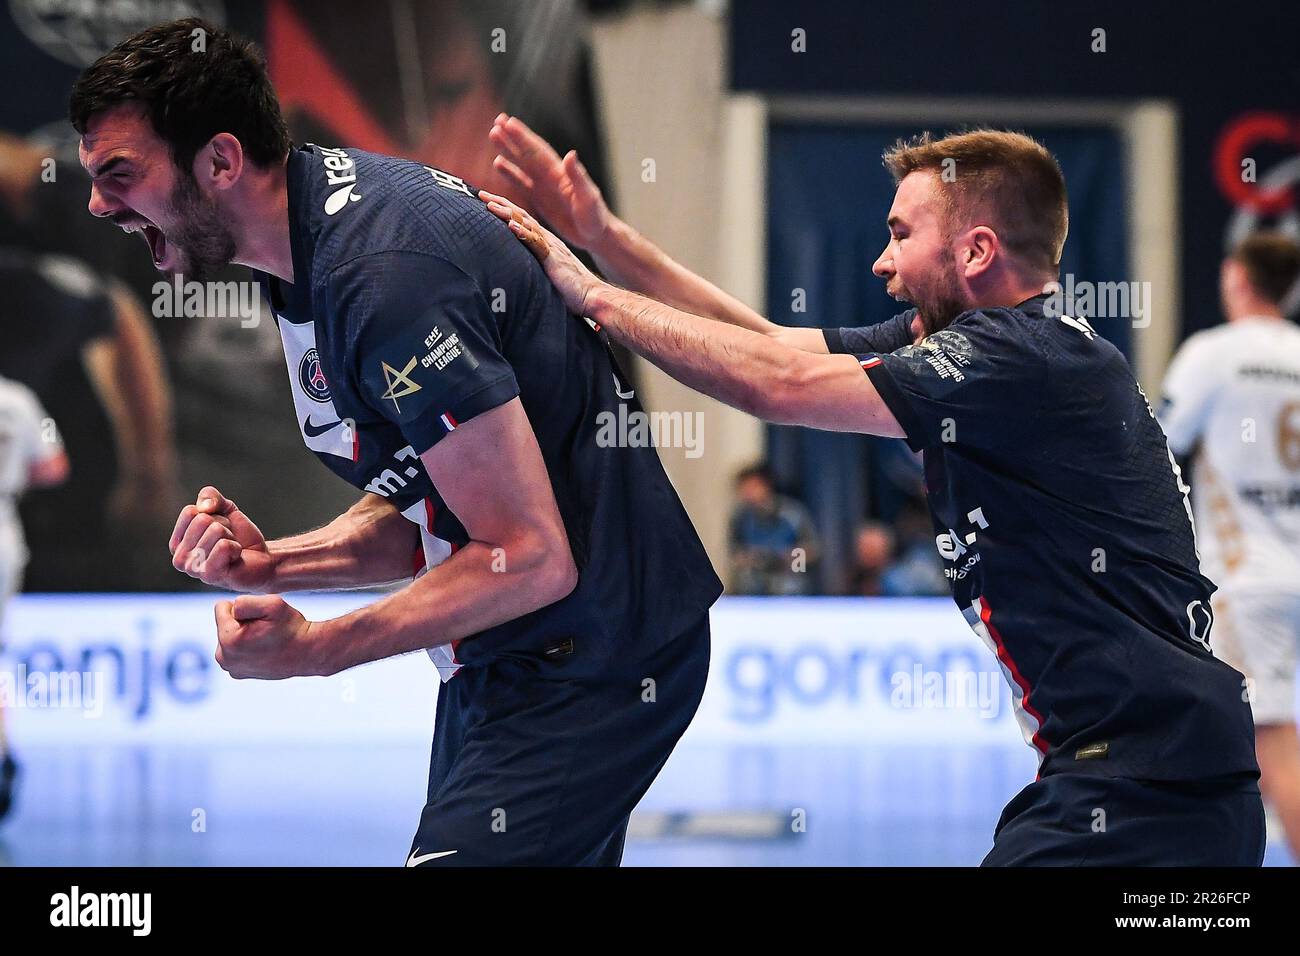 Paris, France, May 17, 2023, Paris, France - May 17, 2023, Petar NENADIC of PSG celebrate his point with Luc STEINS of PSG during the EHF Champions League, Quarter-finals, 2nd leg handball match between Paris Saint-Germain and THW Kiel on May 17, 2023 at Pierre de Coubertin stadium in Paris, France - Photo: Matthieu Mirville/DPPI/LiveMedia Stock Photo